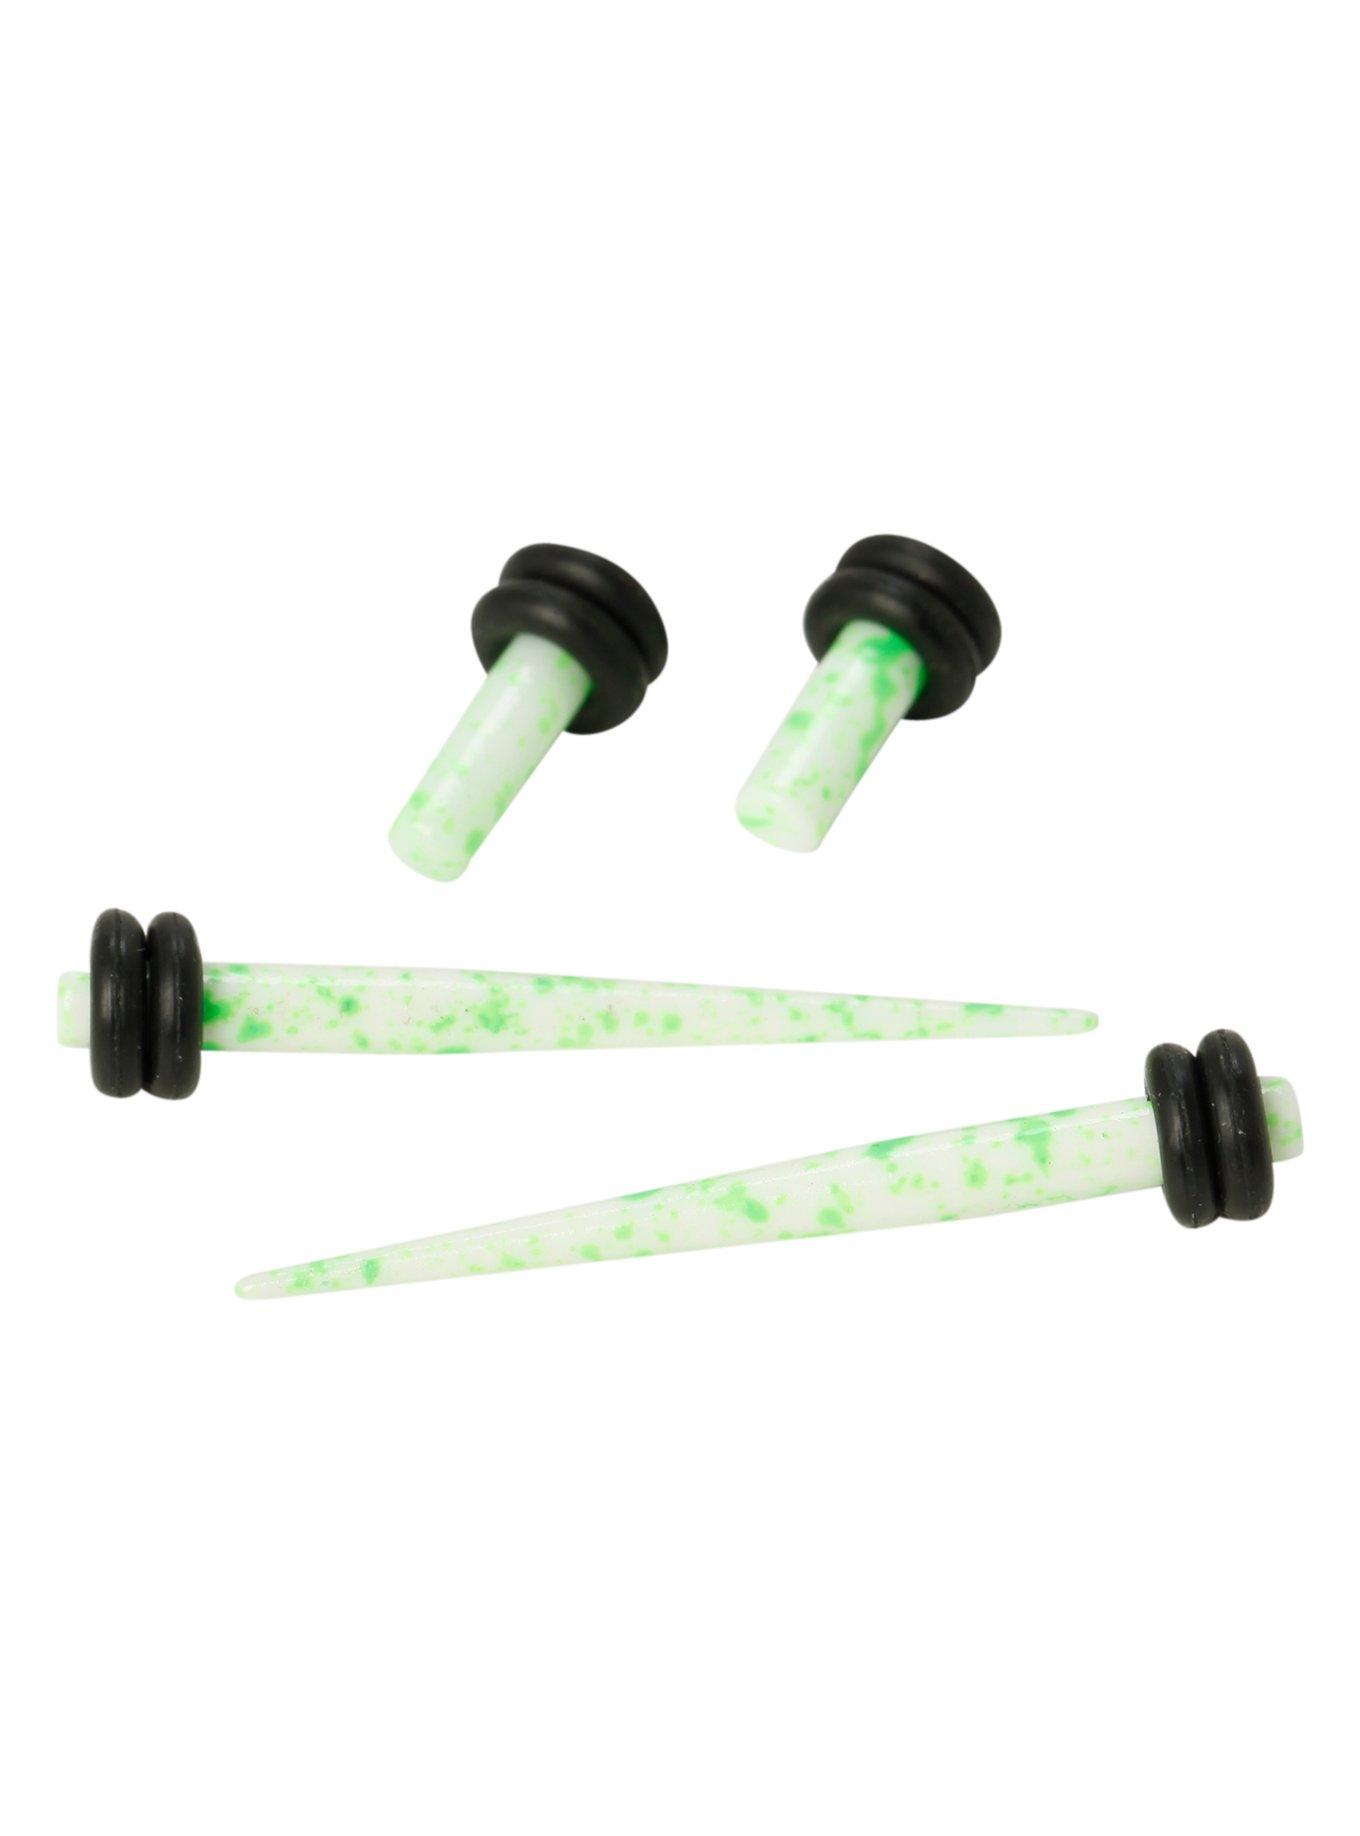 Acrylic White Neon Green Splatter Micro Taper And Plug 4 Pack, LIGHT GREEN, hi-res